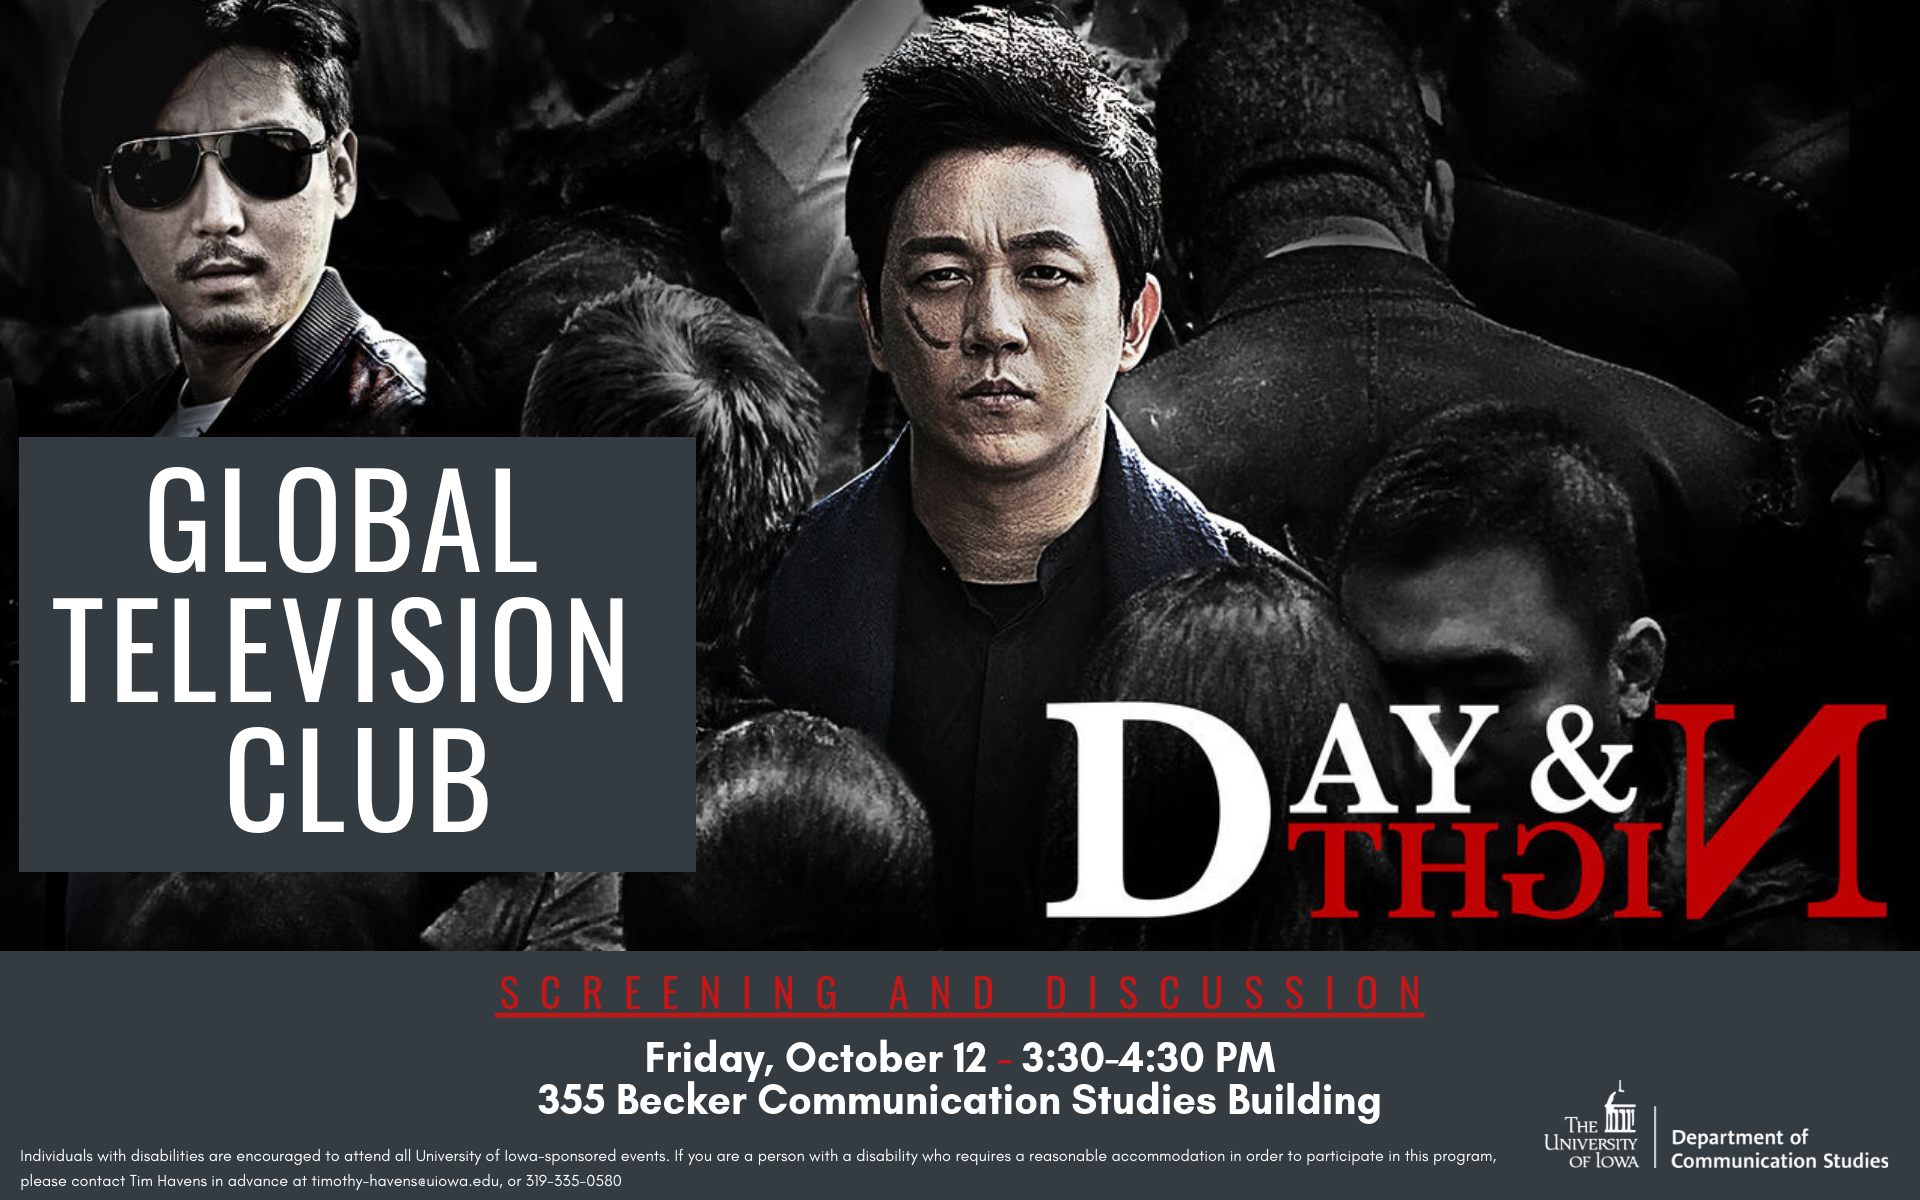 Global Television Club screening and discussion: "Day & Night" - Friday, October 12th 3:30-4:30 PM, 355 BCSB